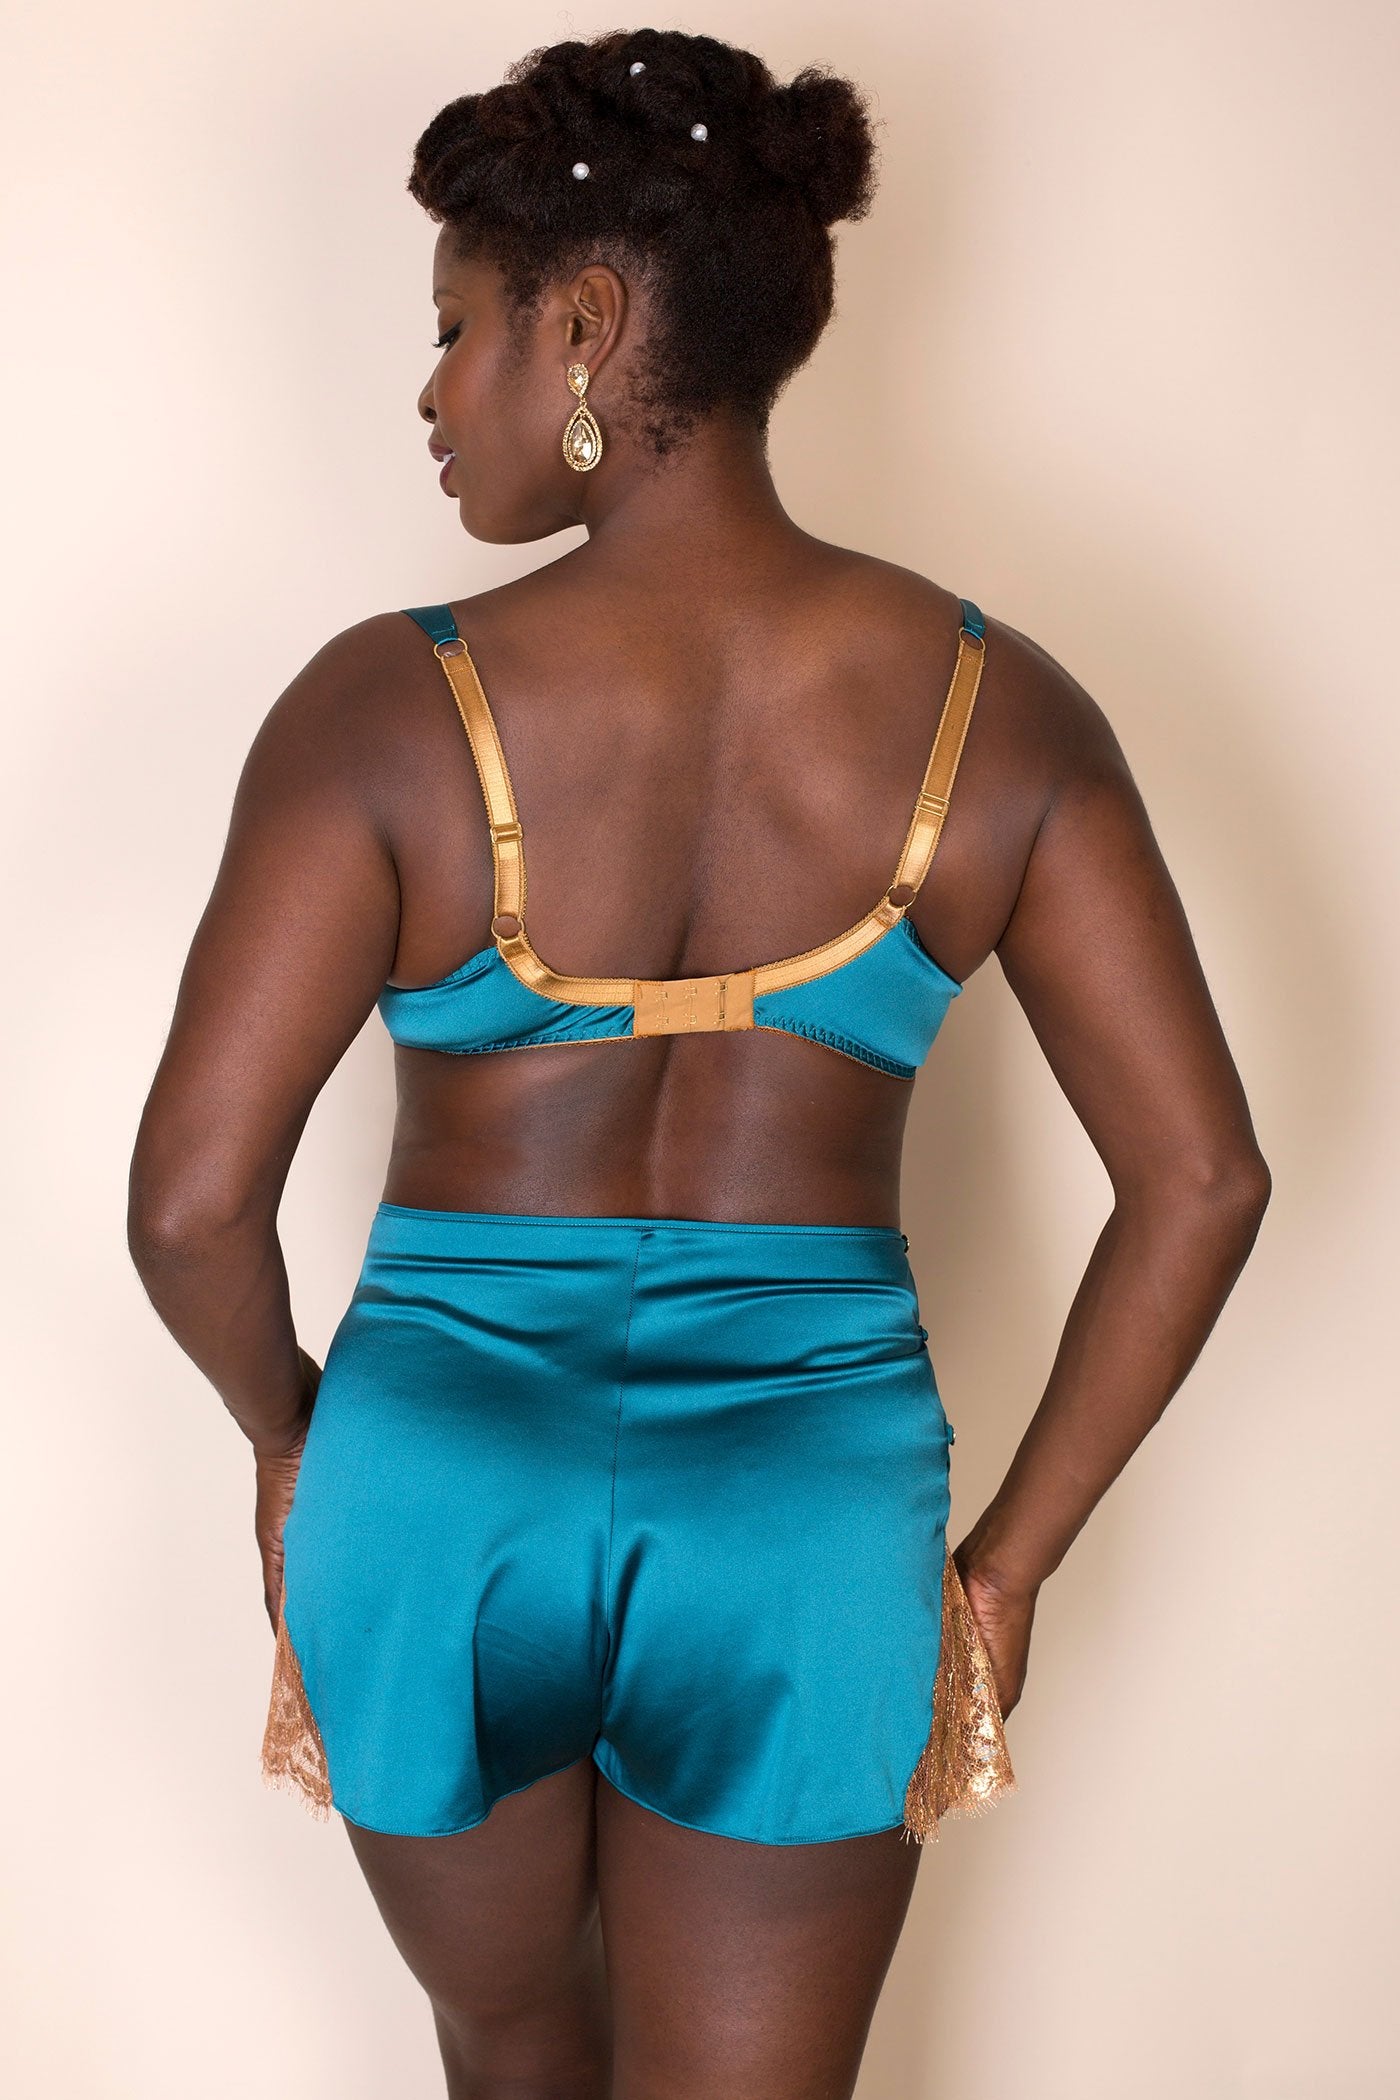 Vintage inspired silk tap pants back view, with matching gold and blue silk bra